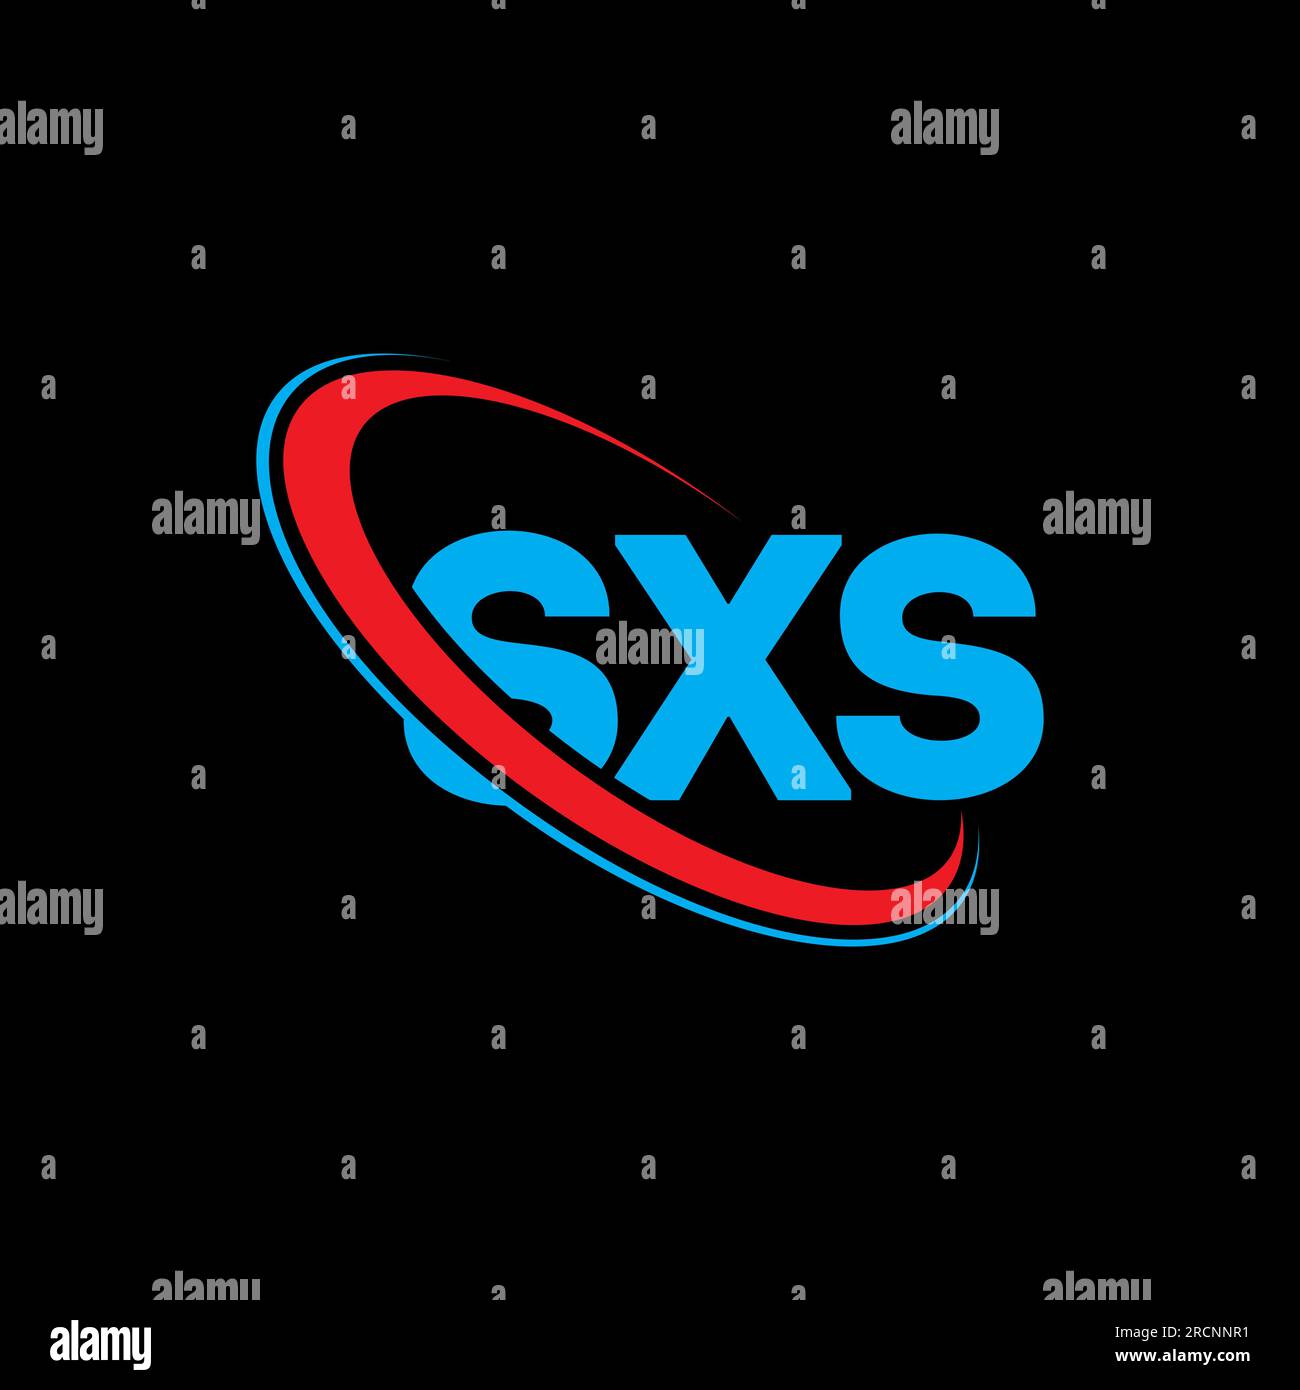 Sxs Stock Vector Images - Alamy